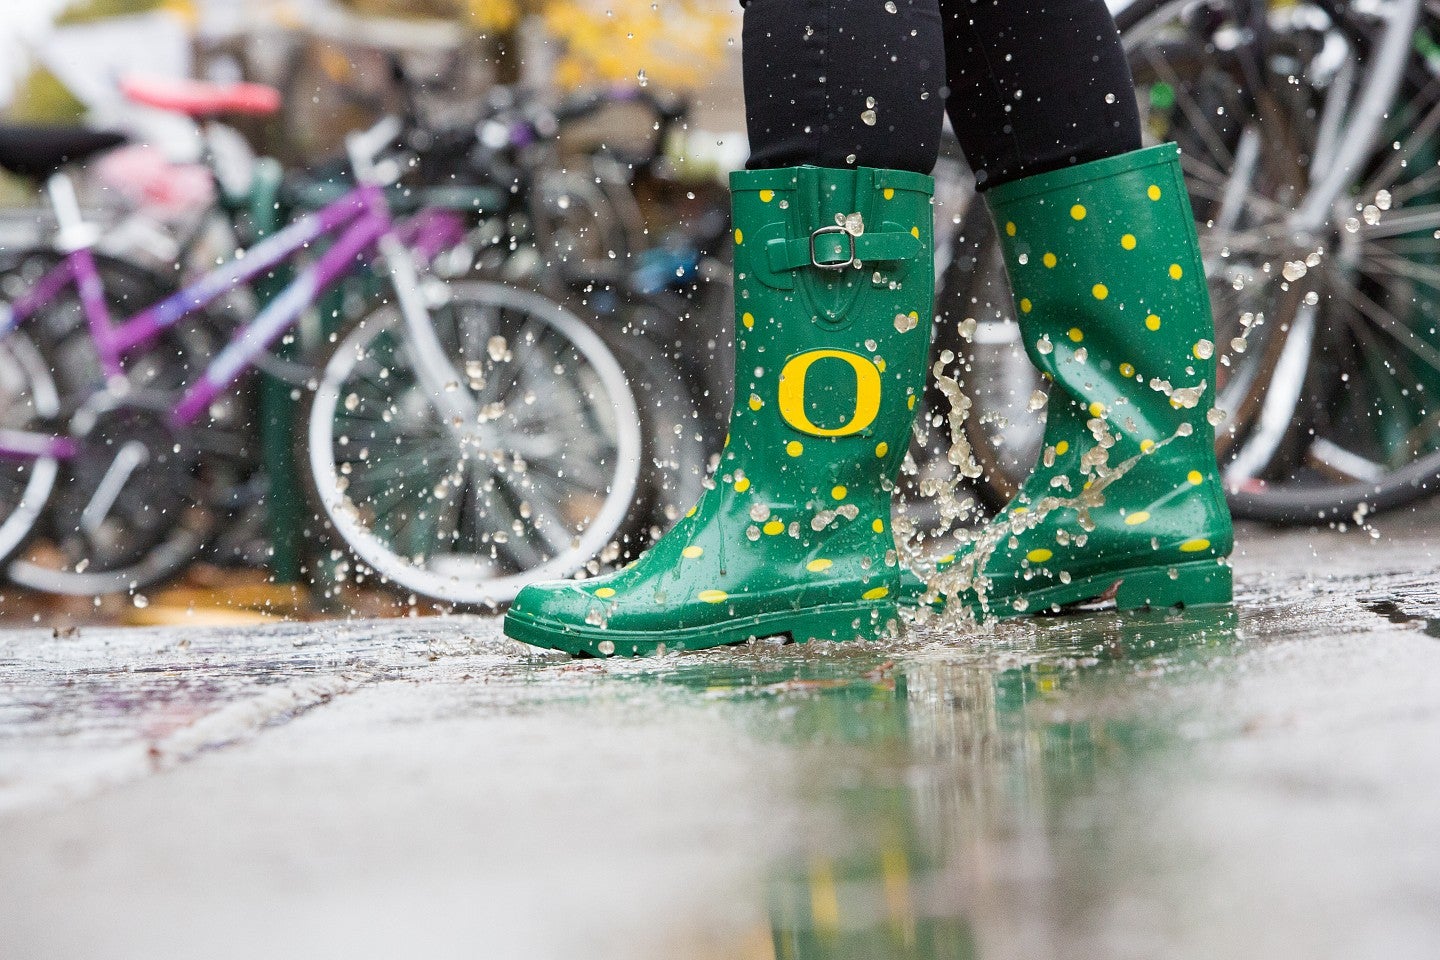 Rainboots with the UO "O" in a rainy puddle with bicycles in the background.